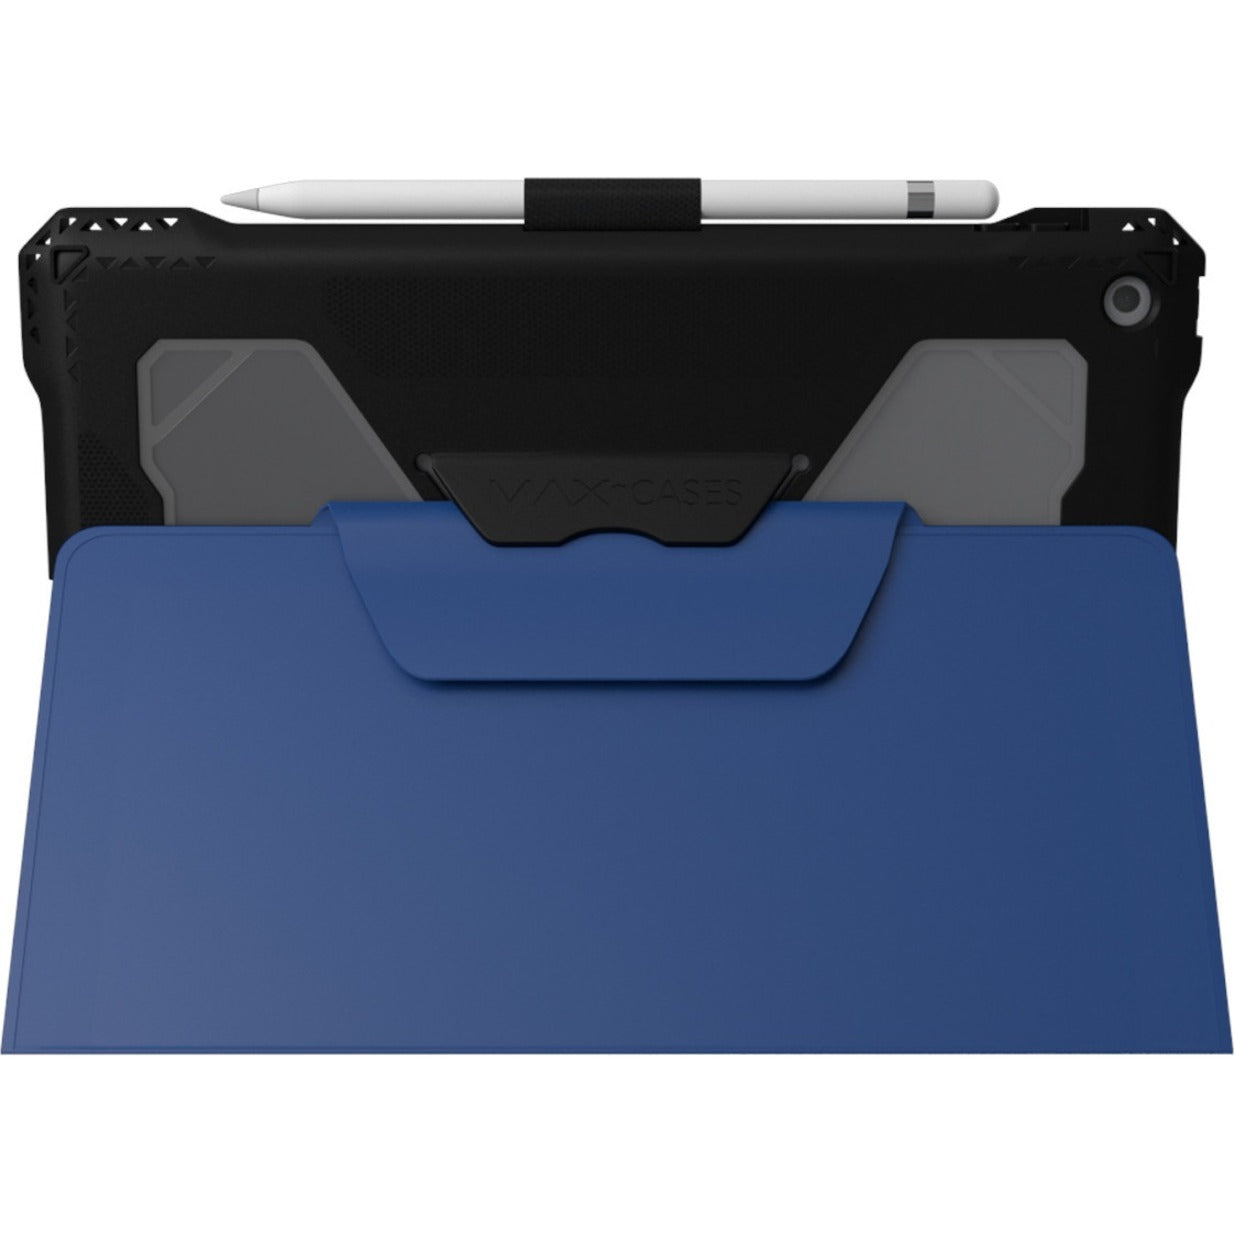 MAXCases Extreme Folio-X2 Rugged Carrying Case (Folio) for 10.2" Apple iPad (9th Generation) iPad (8th Generation) iPad (7th Generation) iPad Tablet - Blue